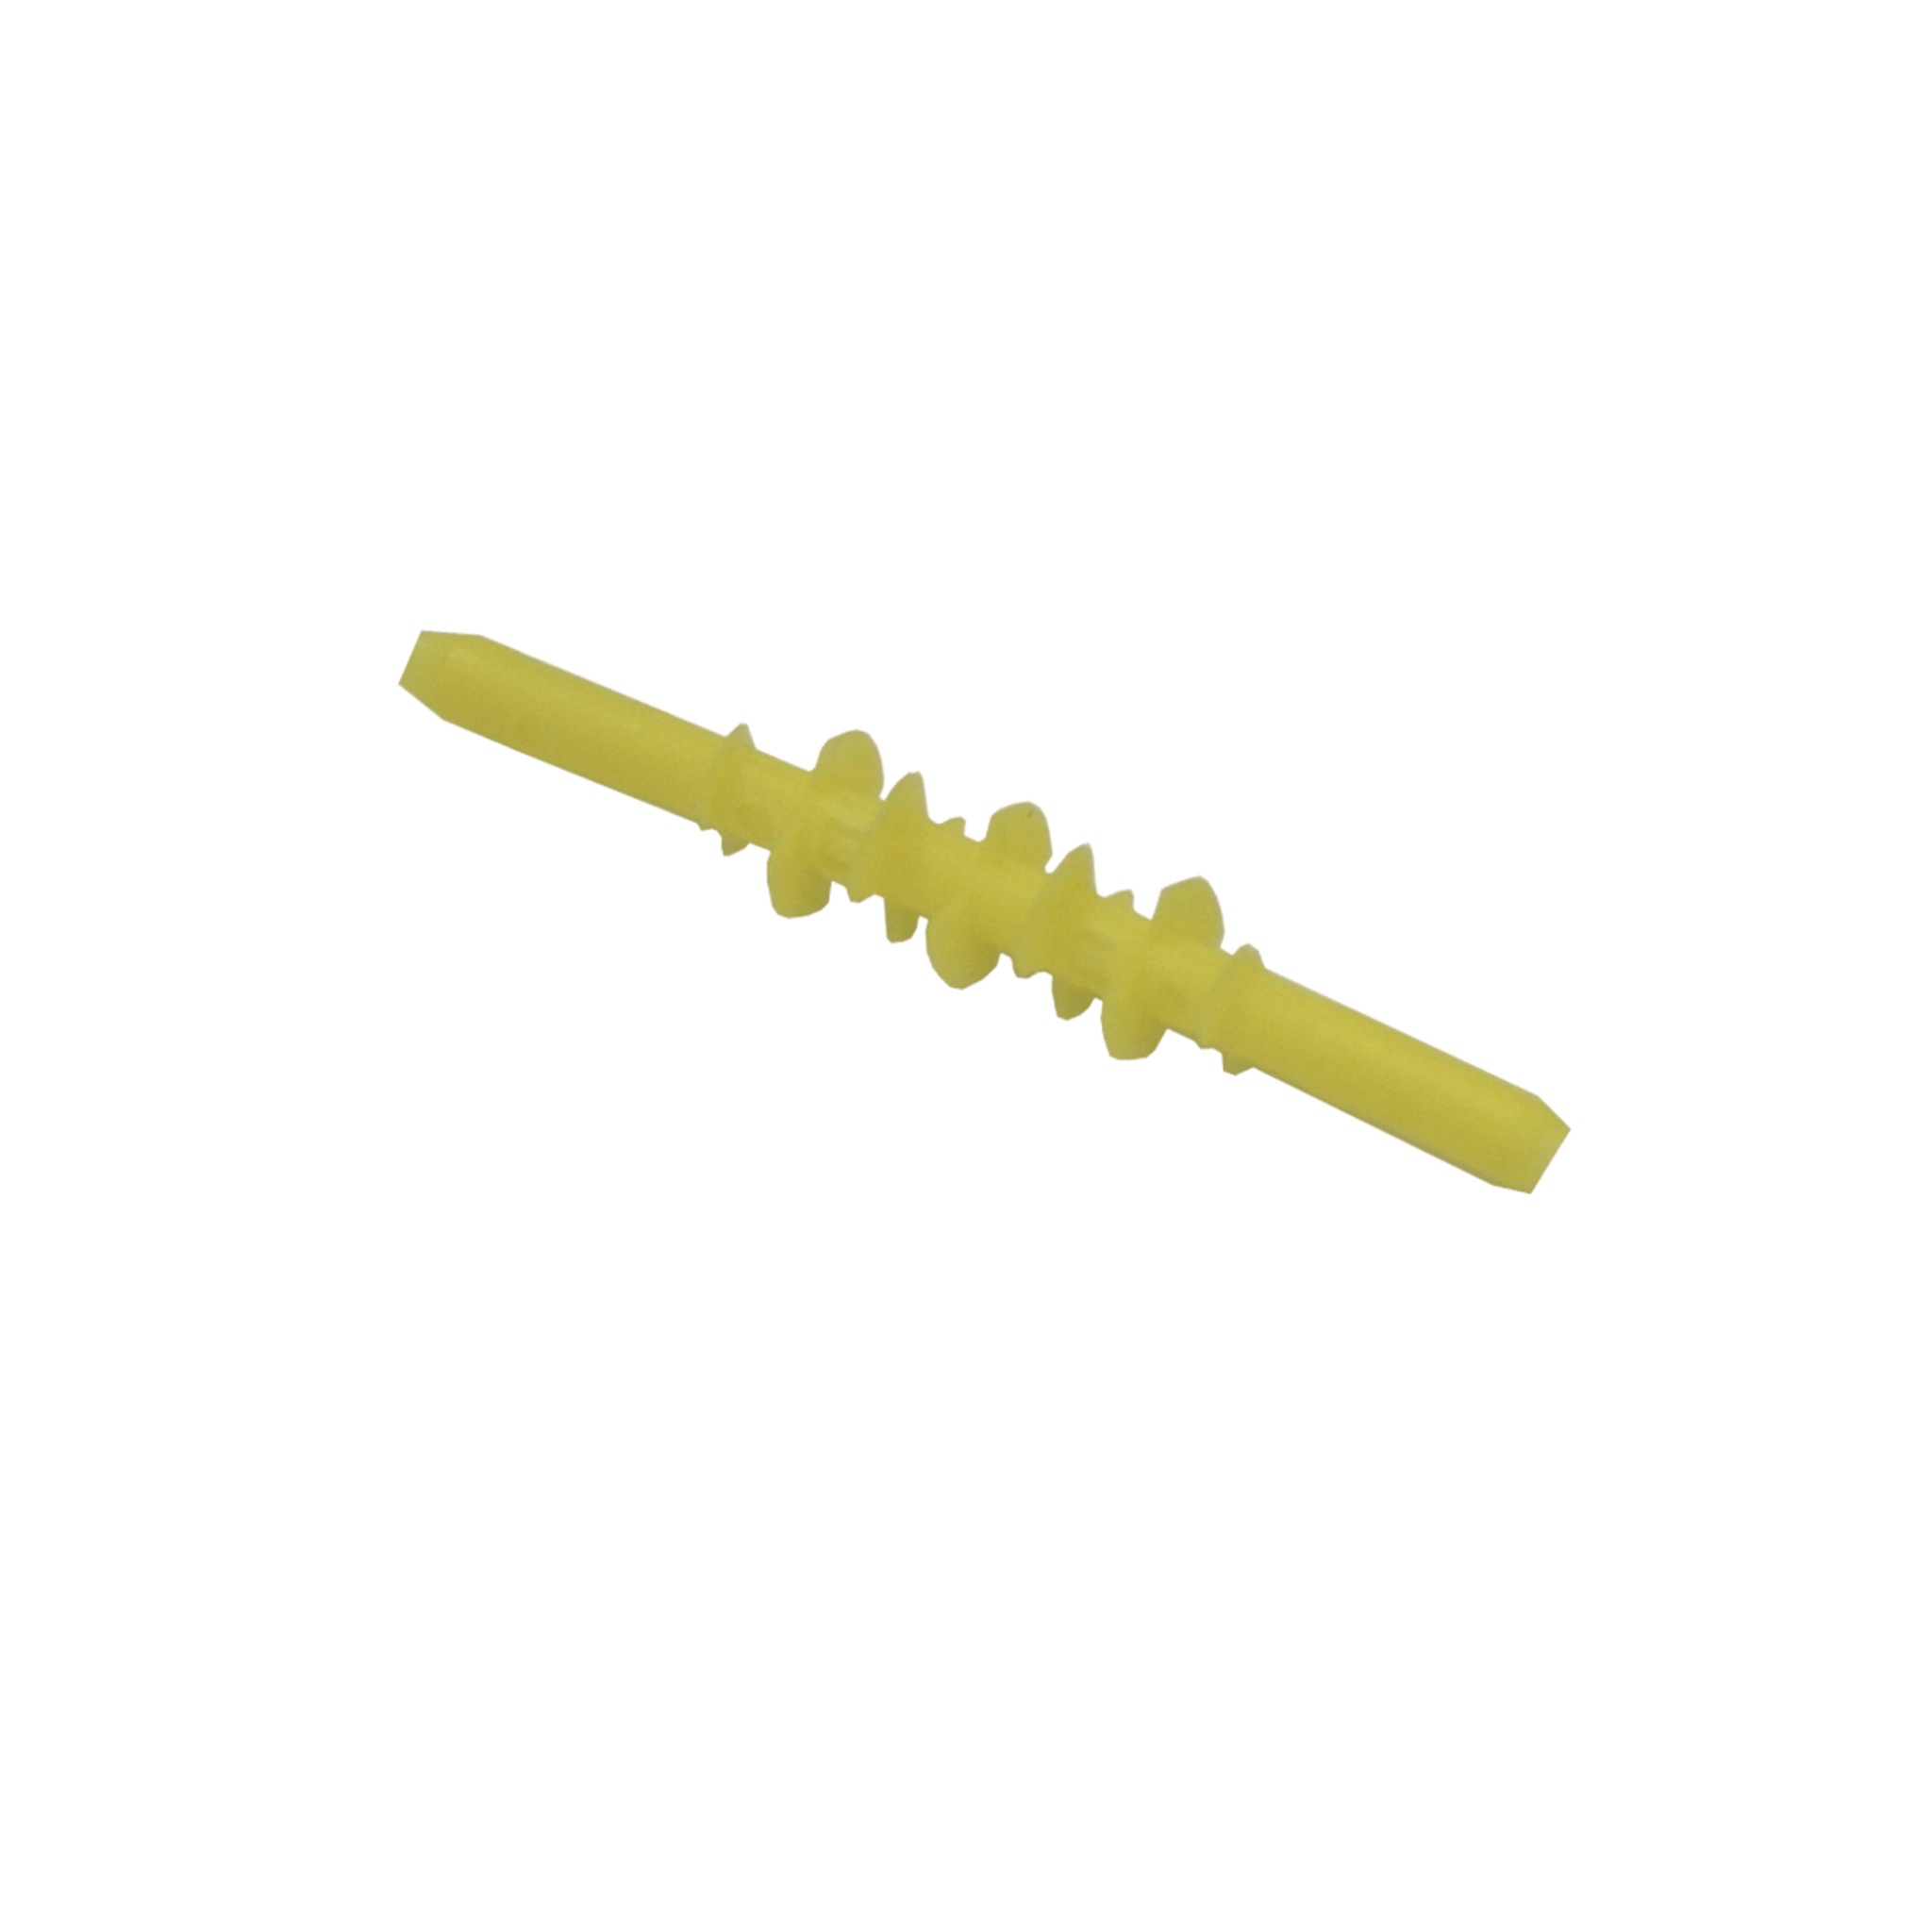 Dispoclean Colon Cleaning Blades- Yellow, 50 Pack, 3.2/ 4.2 mm